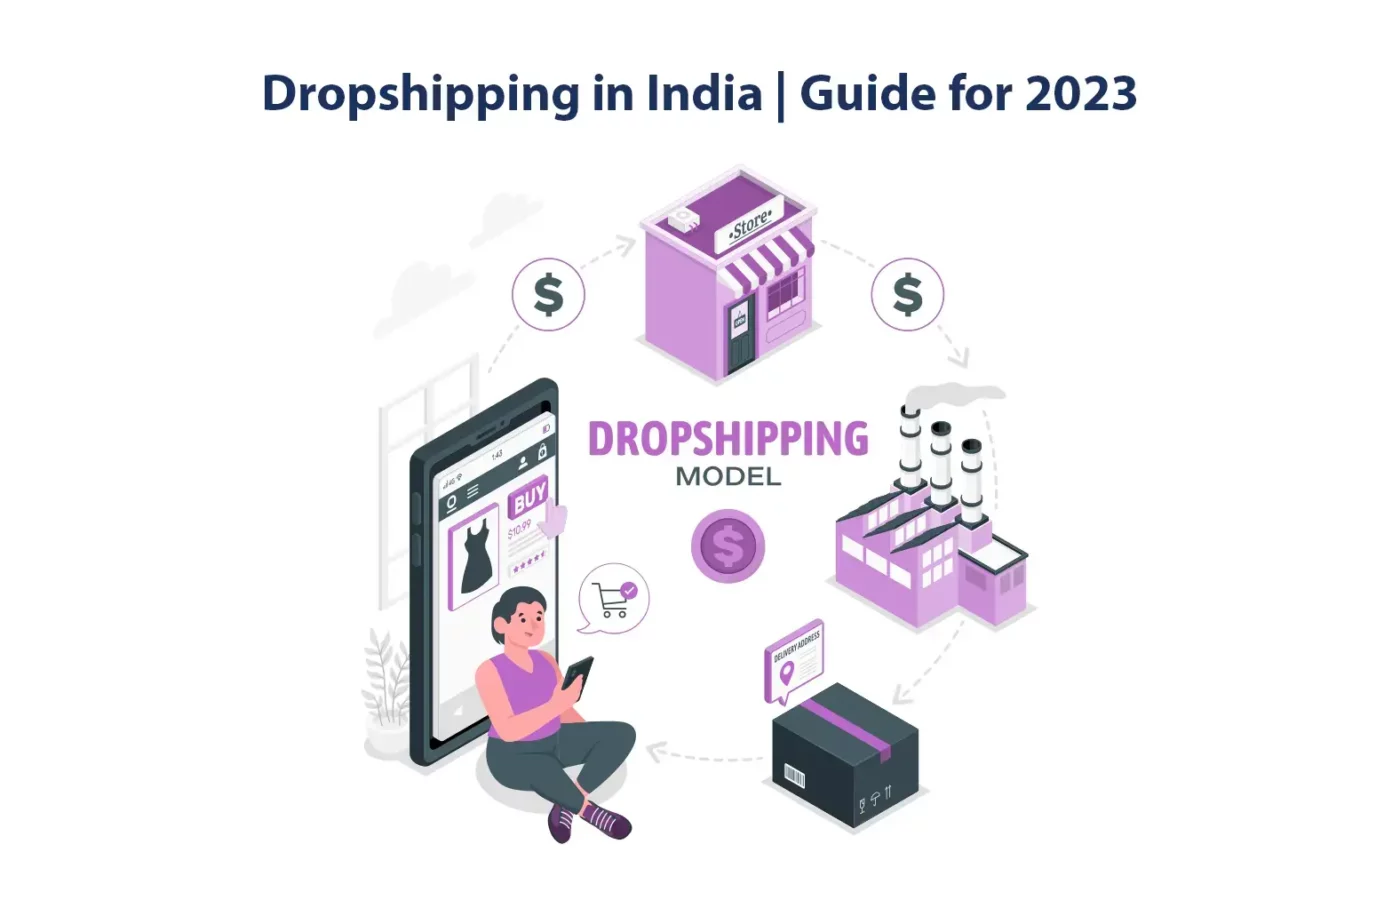 Dropshipping in India | Guide for 2023